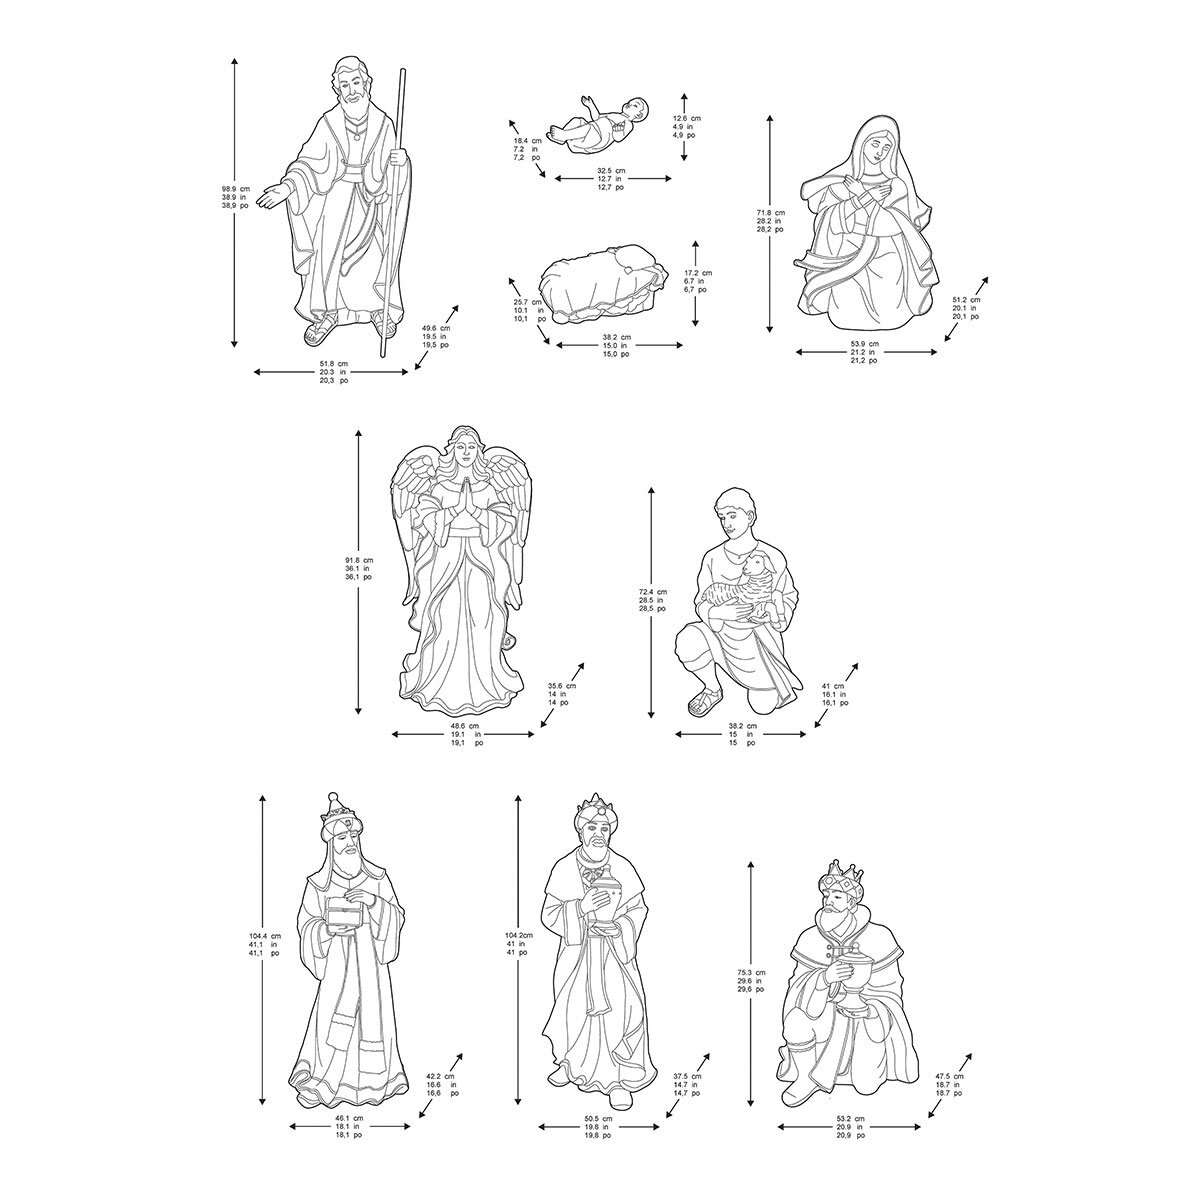 Buy 40in Outdoor Nativity Set Dimensions Image at Costco.co.uk